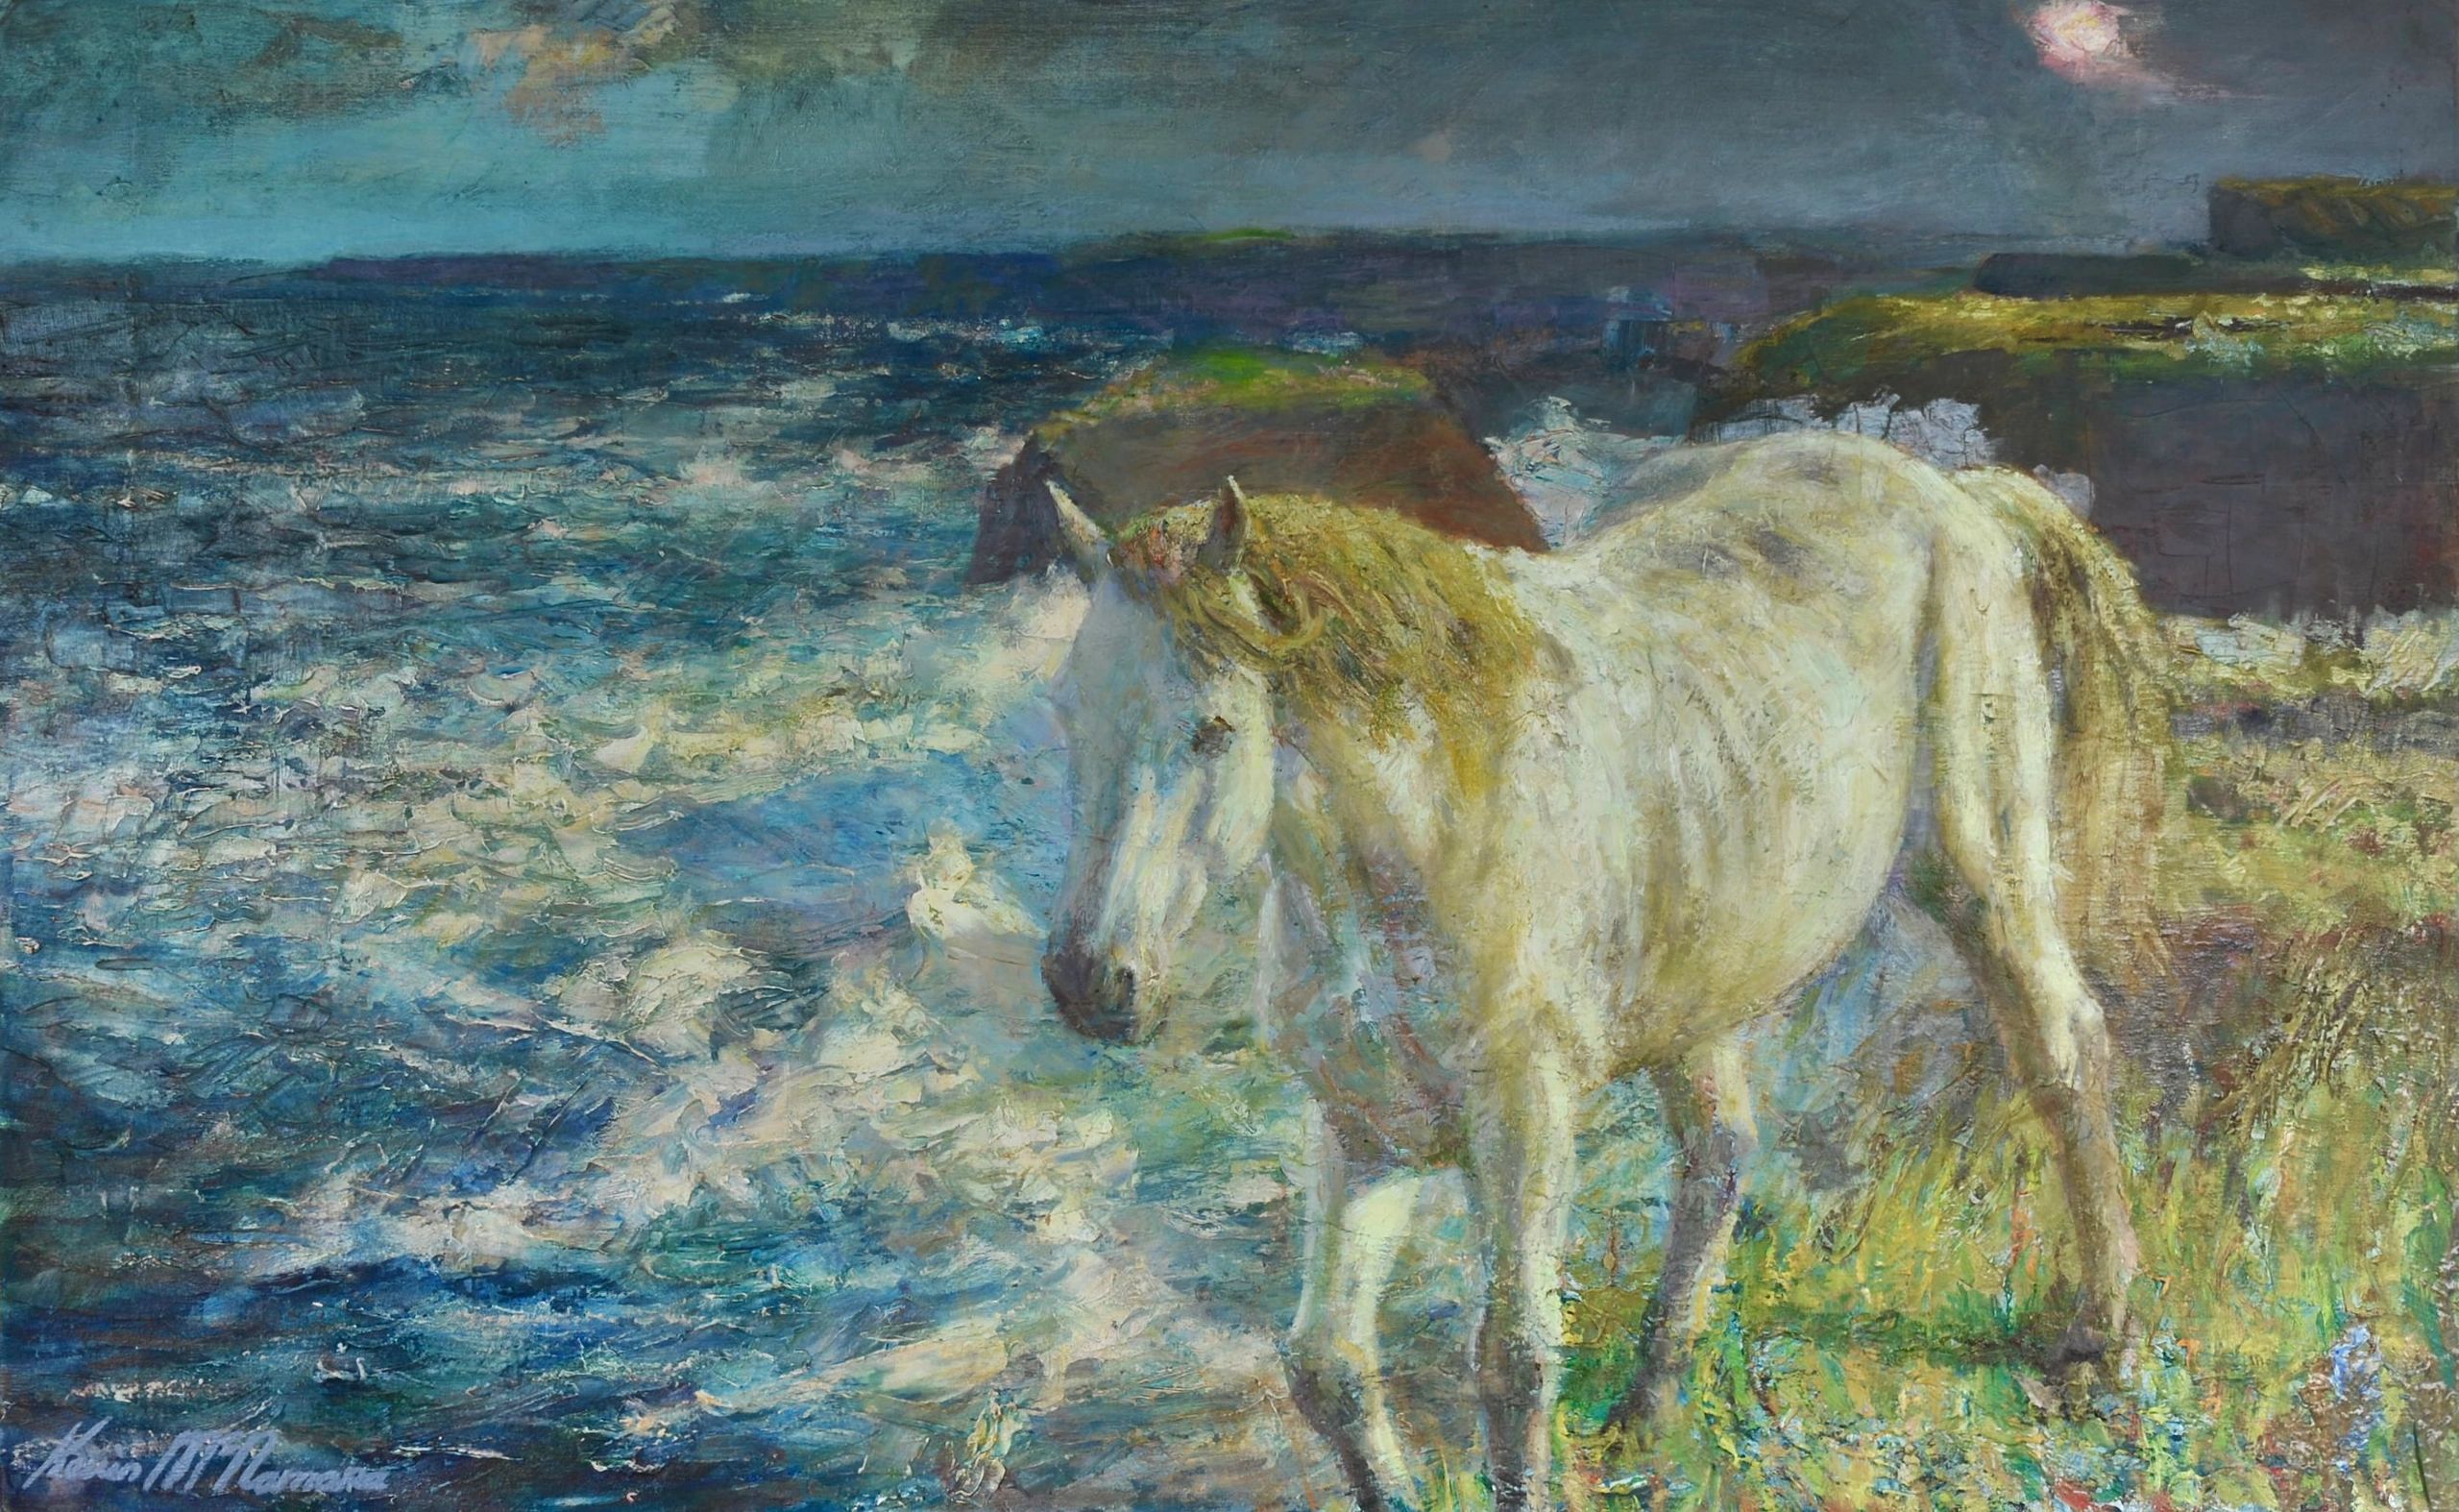 The White Horse, West of Ireland
Oil on Canvas 25" x 40"